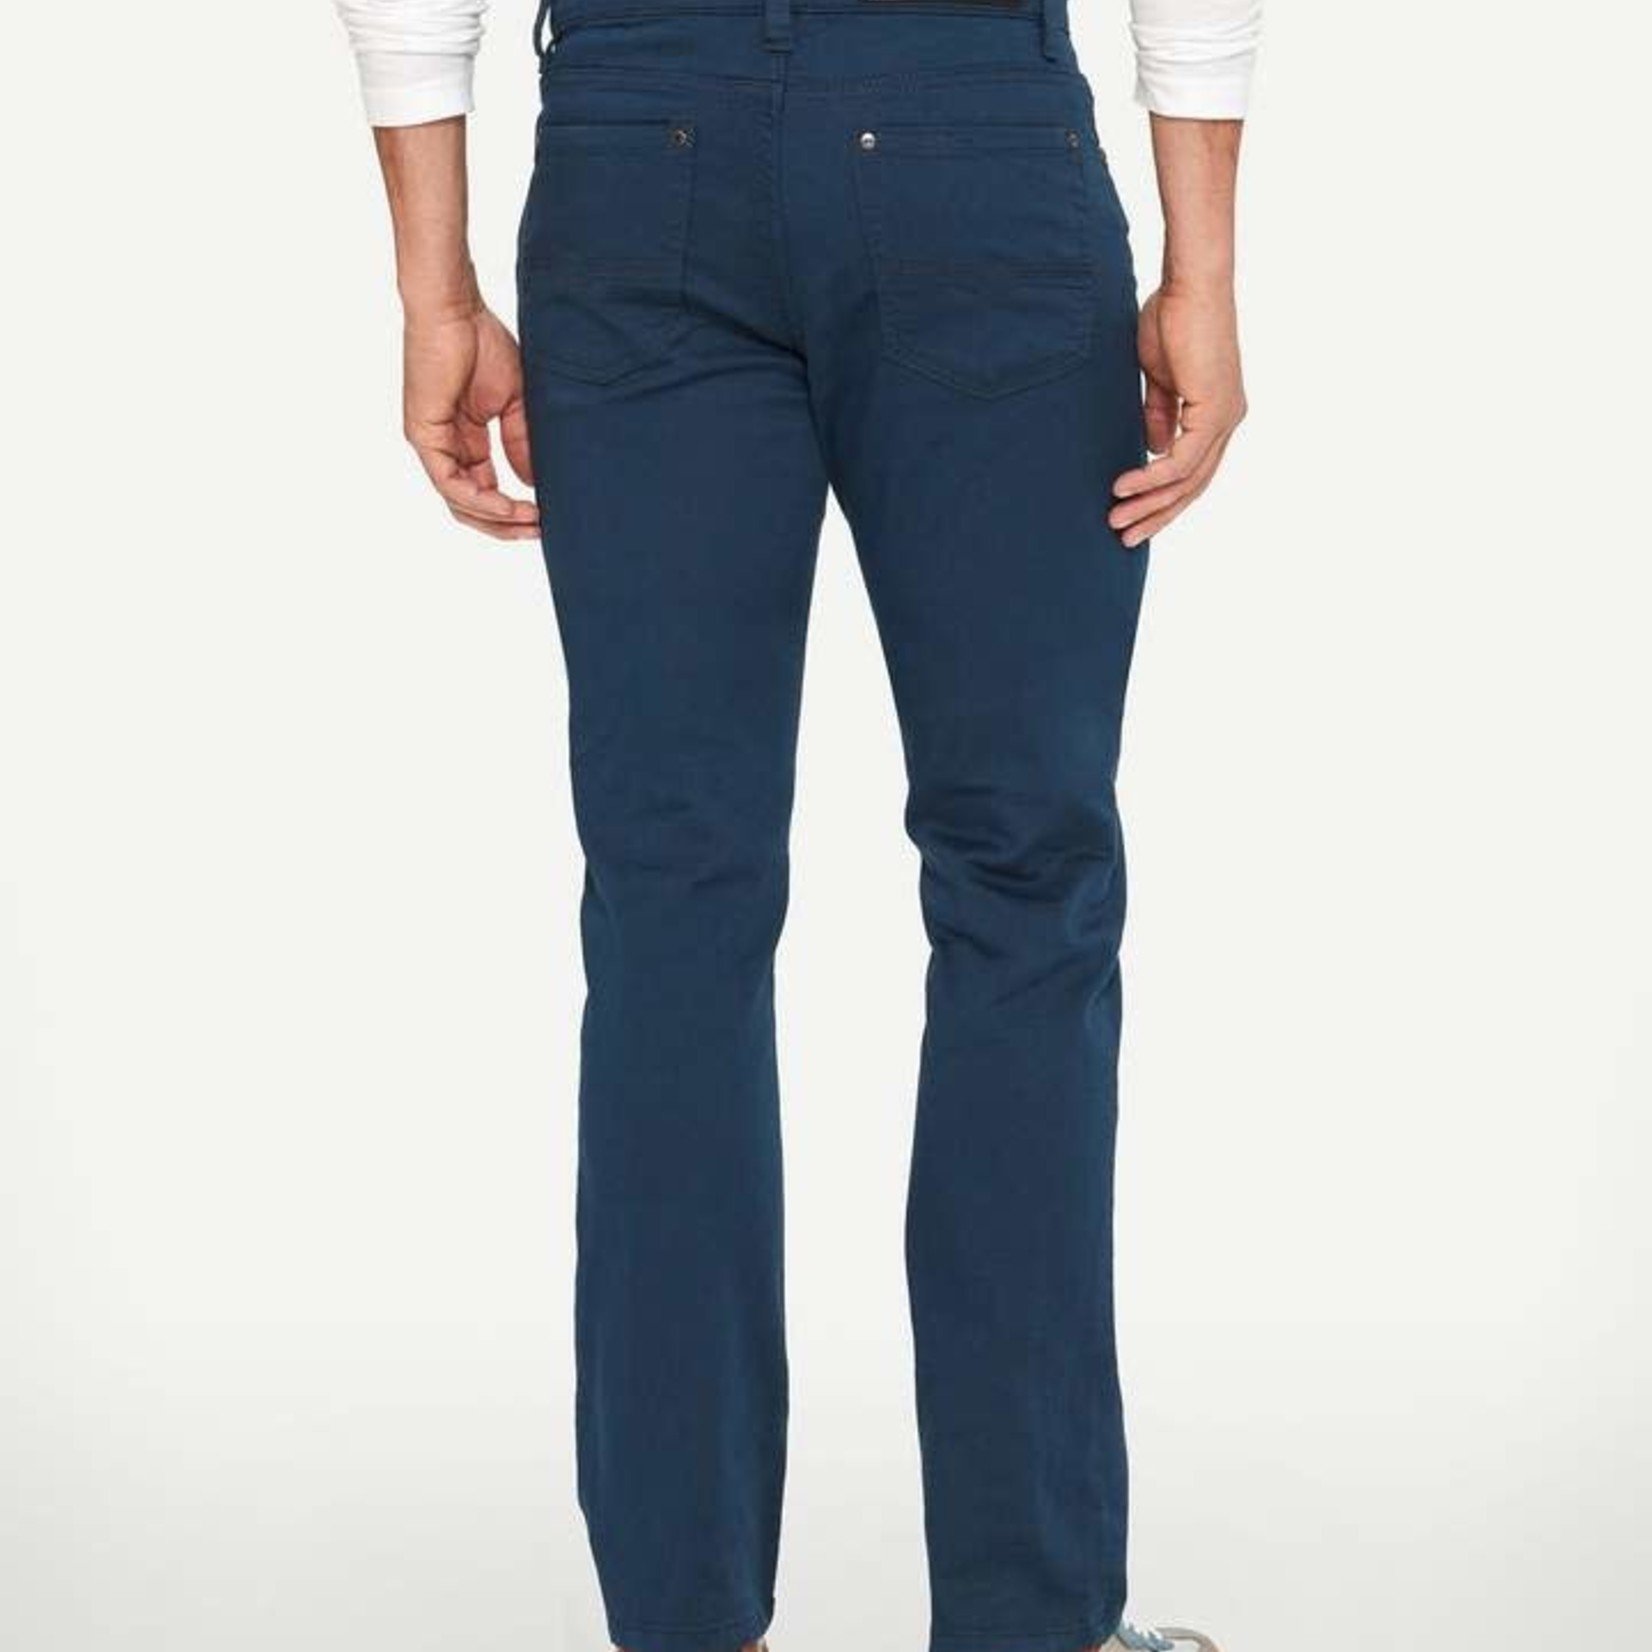 Lois Jeans Canada The "Brad Slim 6240-32" by Lois Jeans